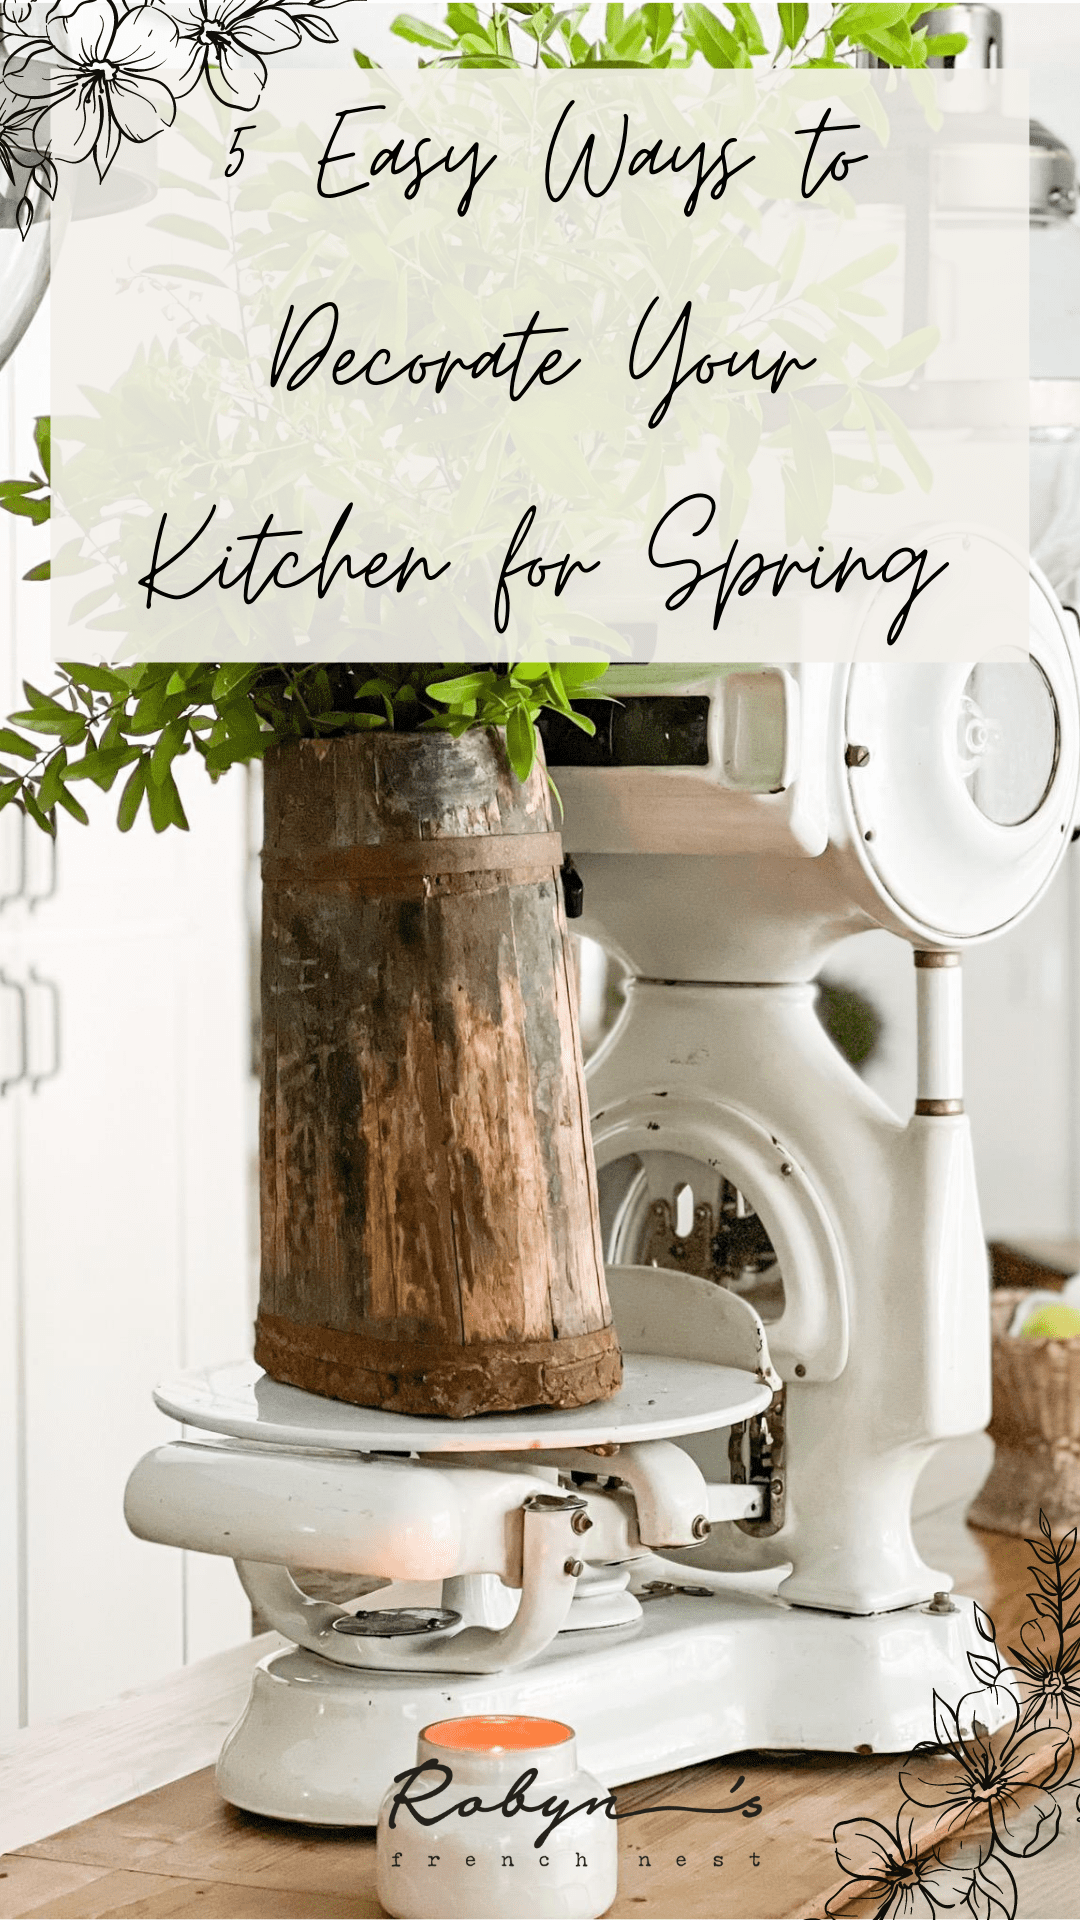 5 Easy Ways to Decorate Your Kitchen for Spring